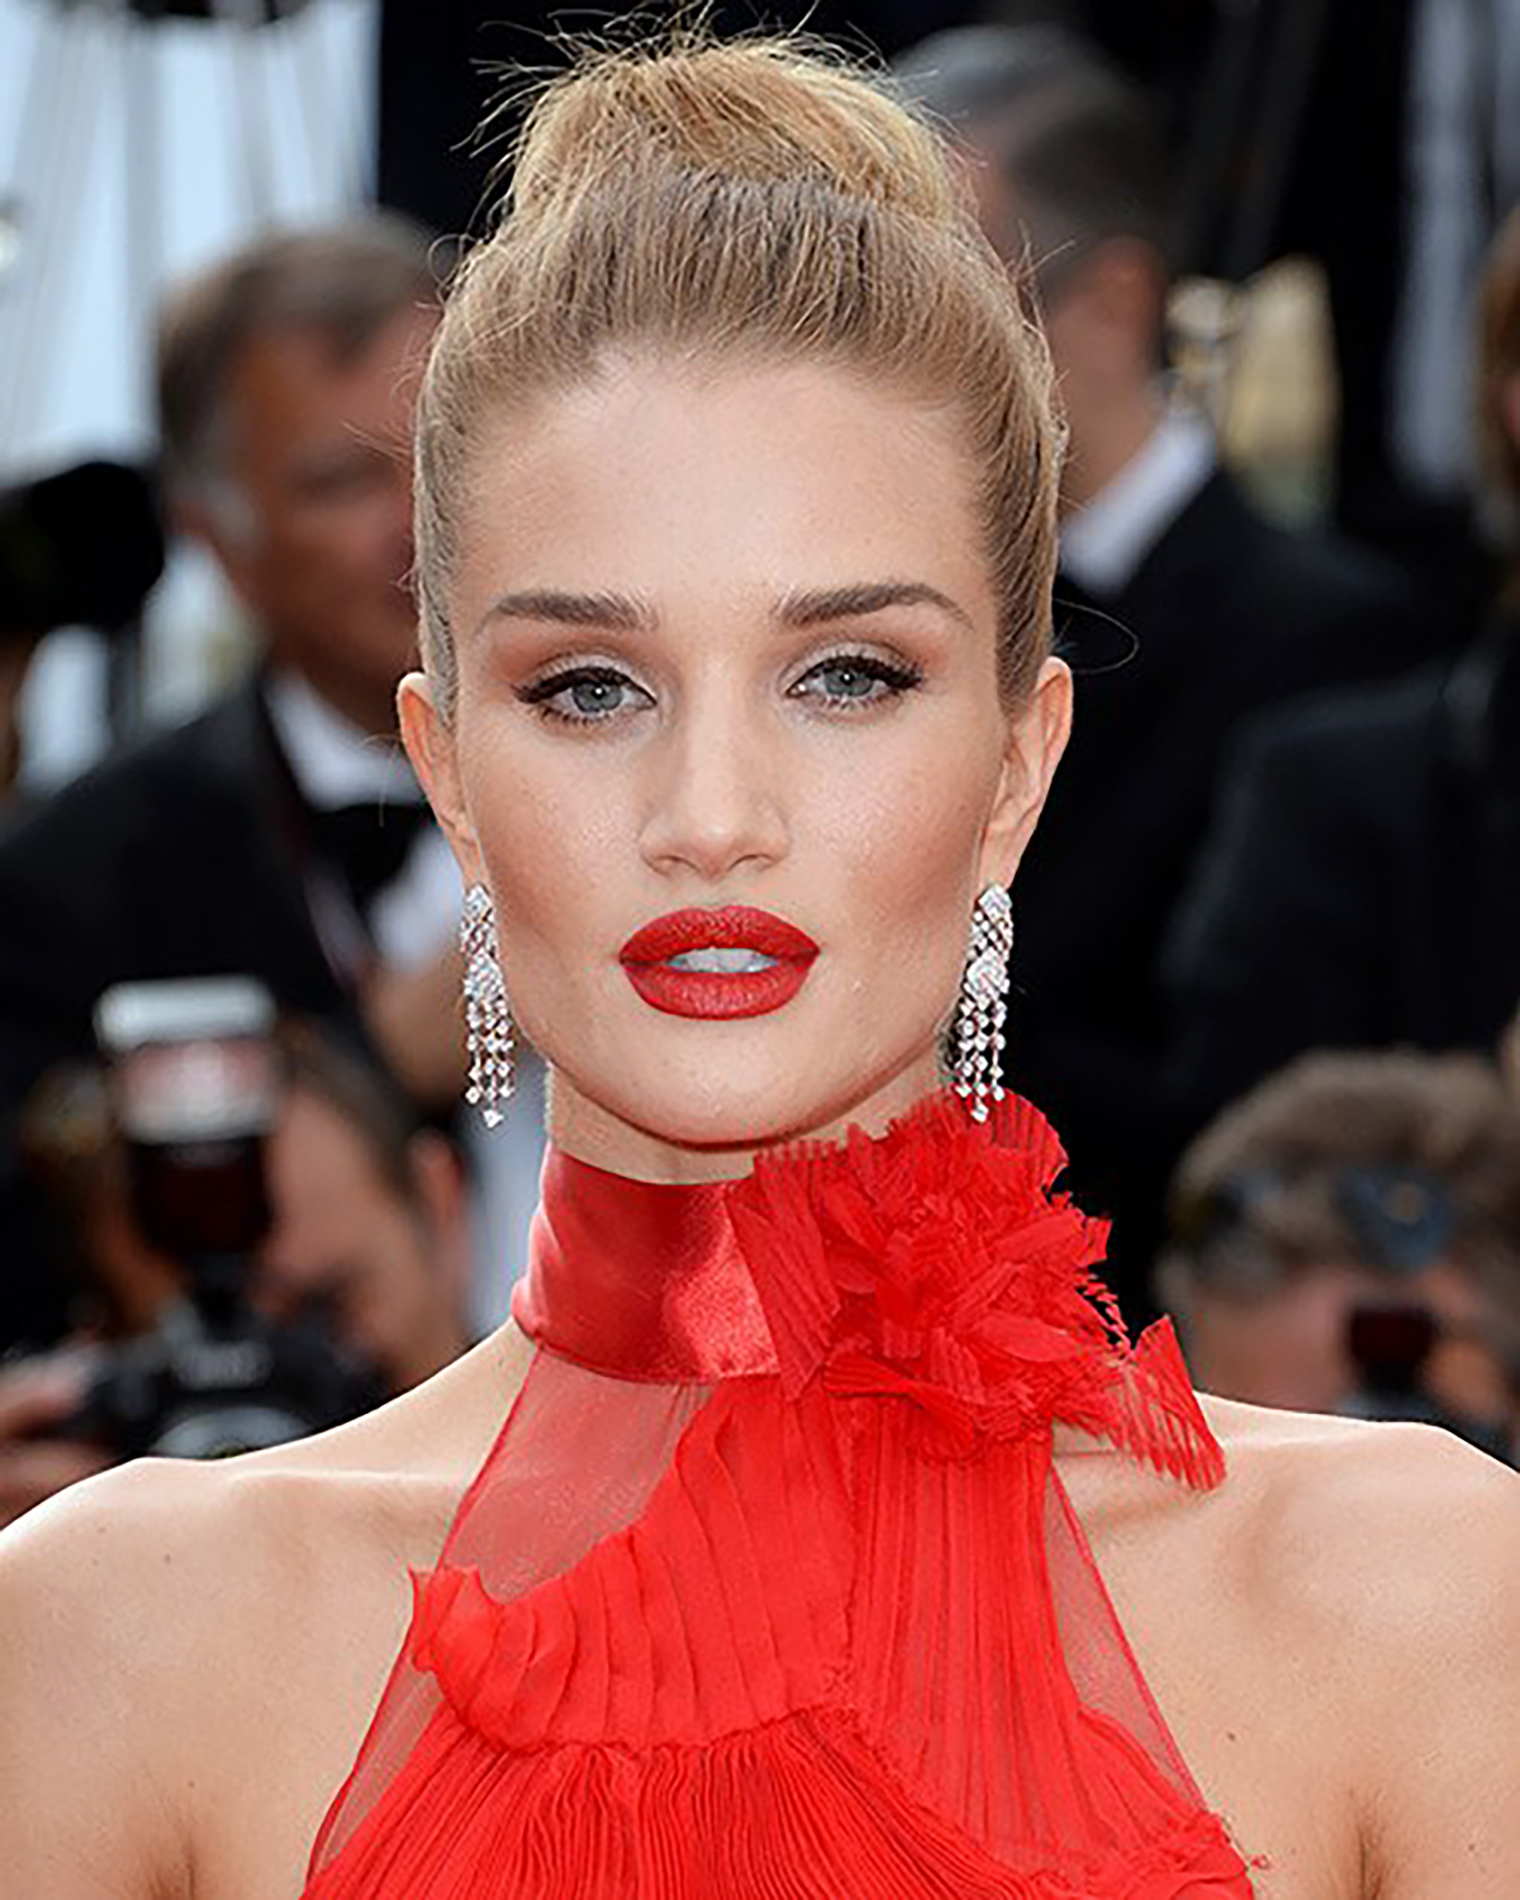 beauty trends blogs daily beauty reporter 2016 05 20 rosie huntington whiteley